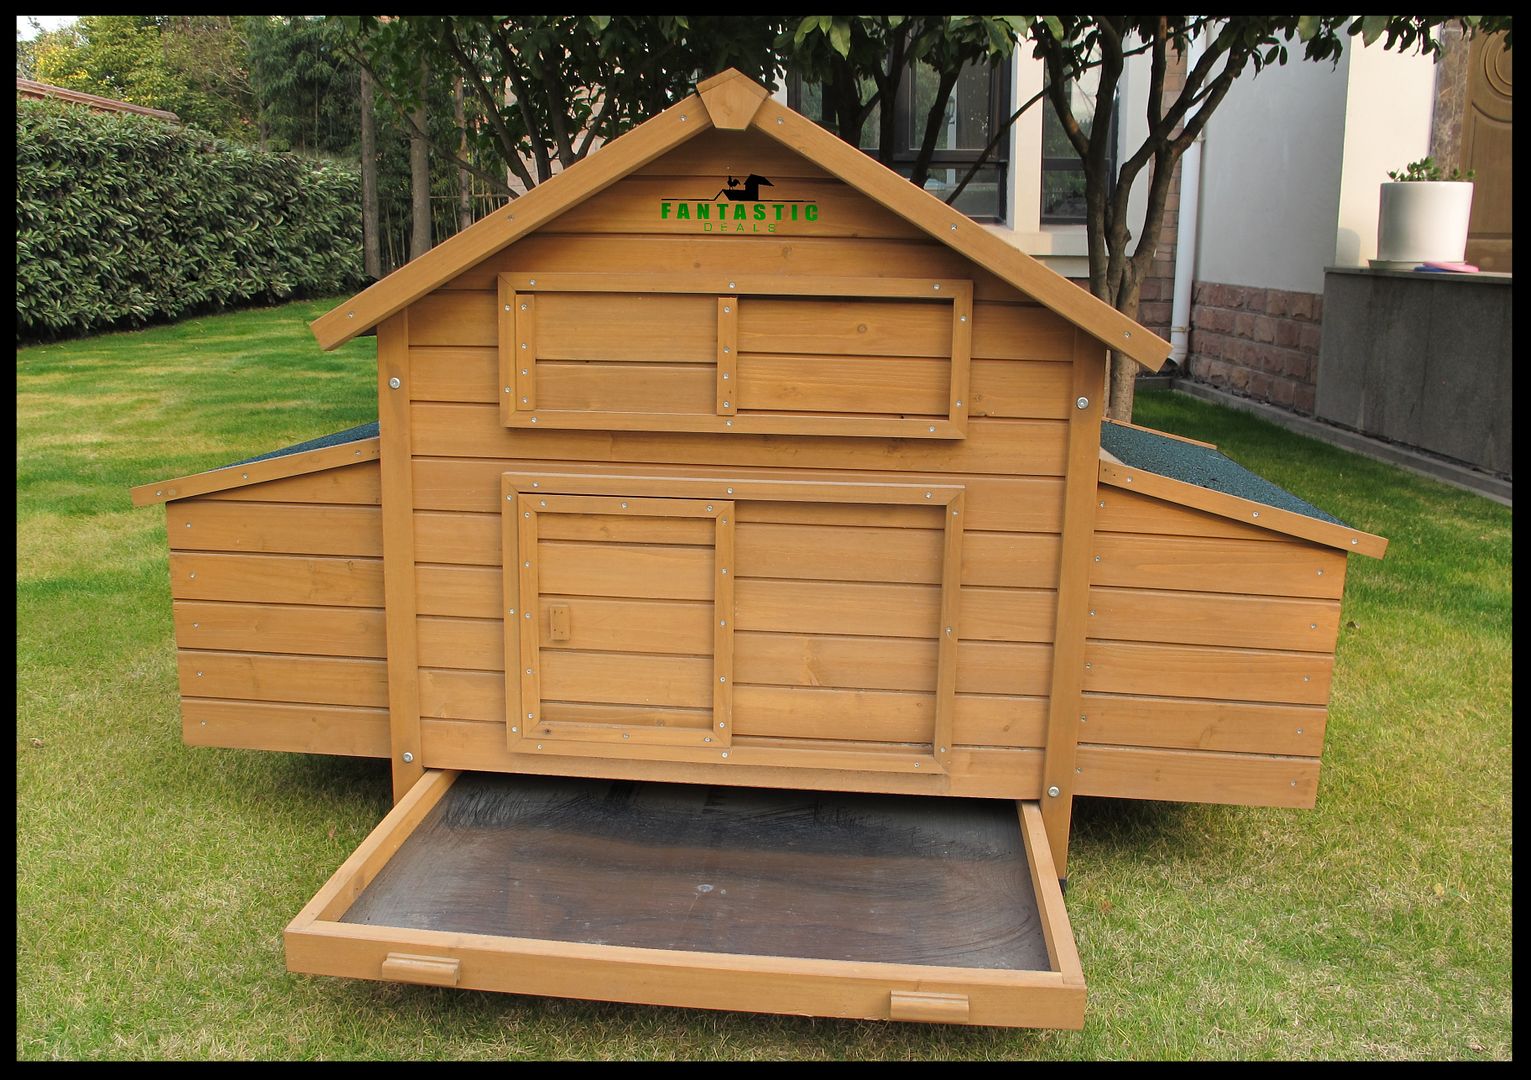 BEAUMONT LARGE DELUXE CHICKEN COOP HEN POULTRY HOUSE RABBIT HUTCH RUN 